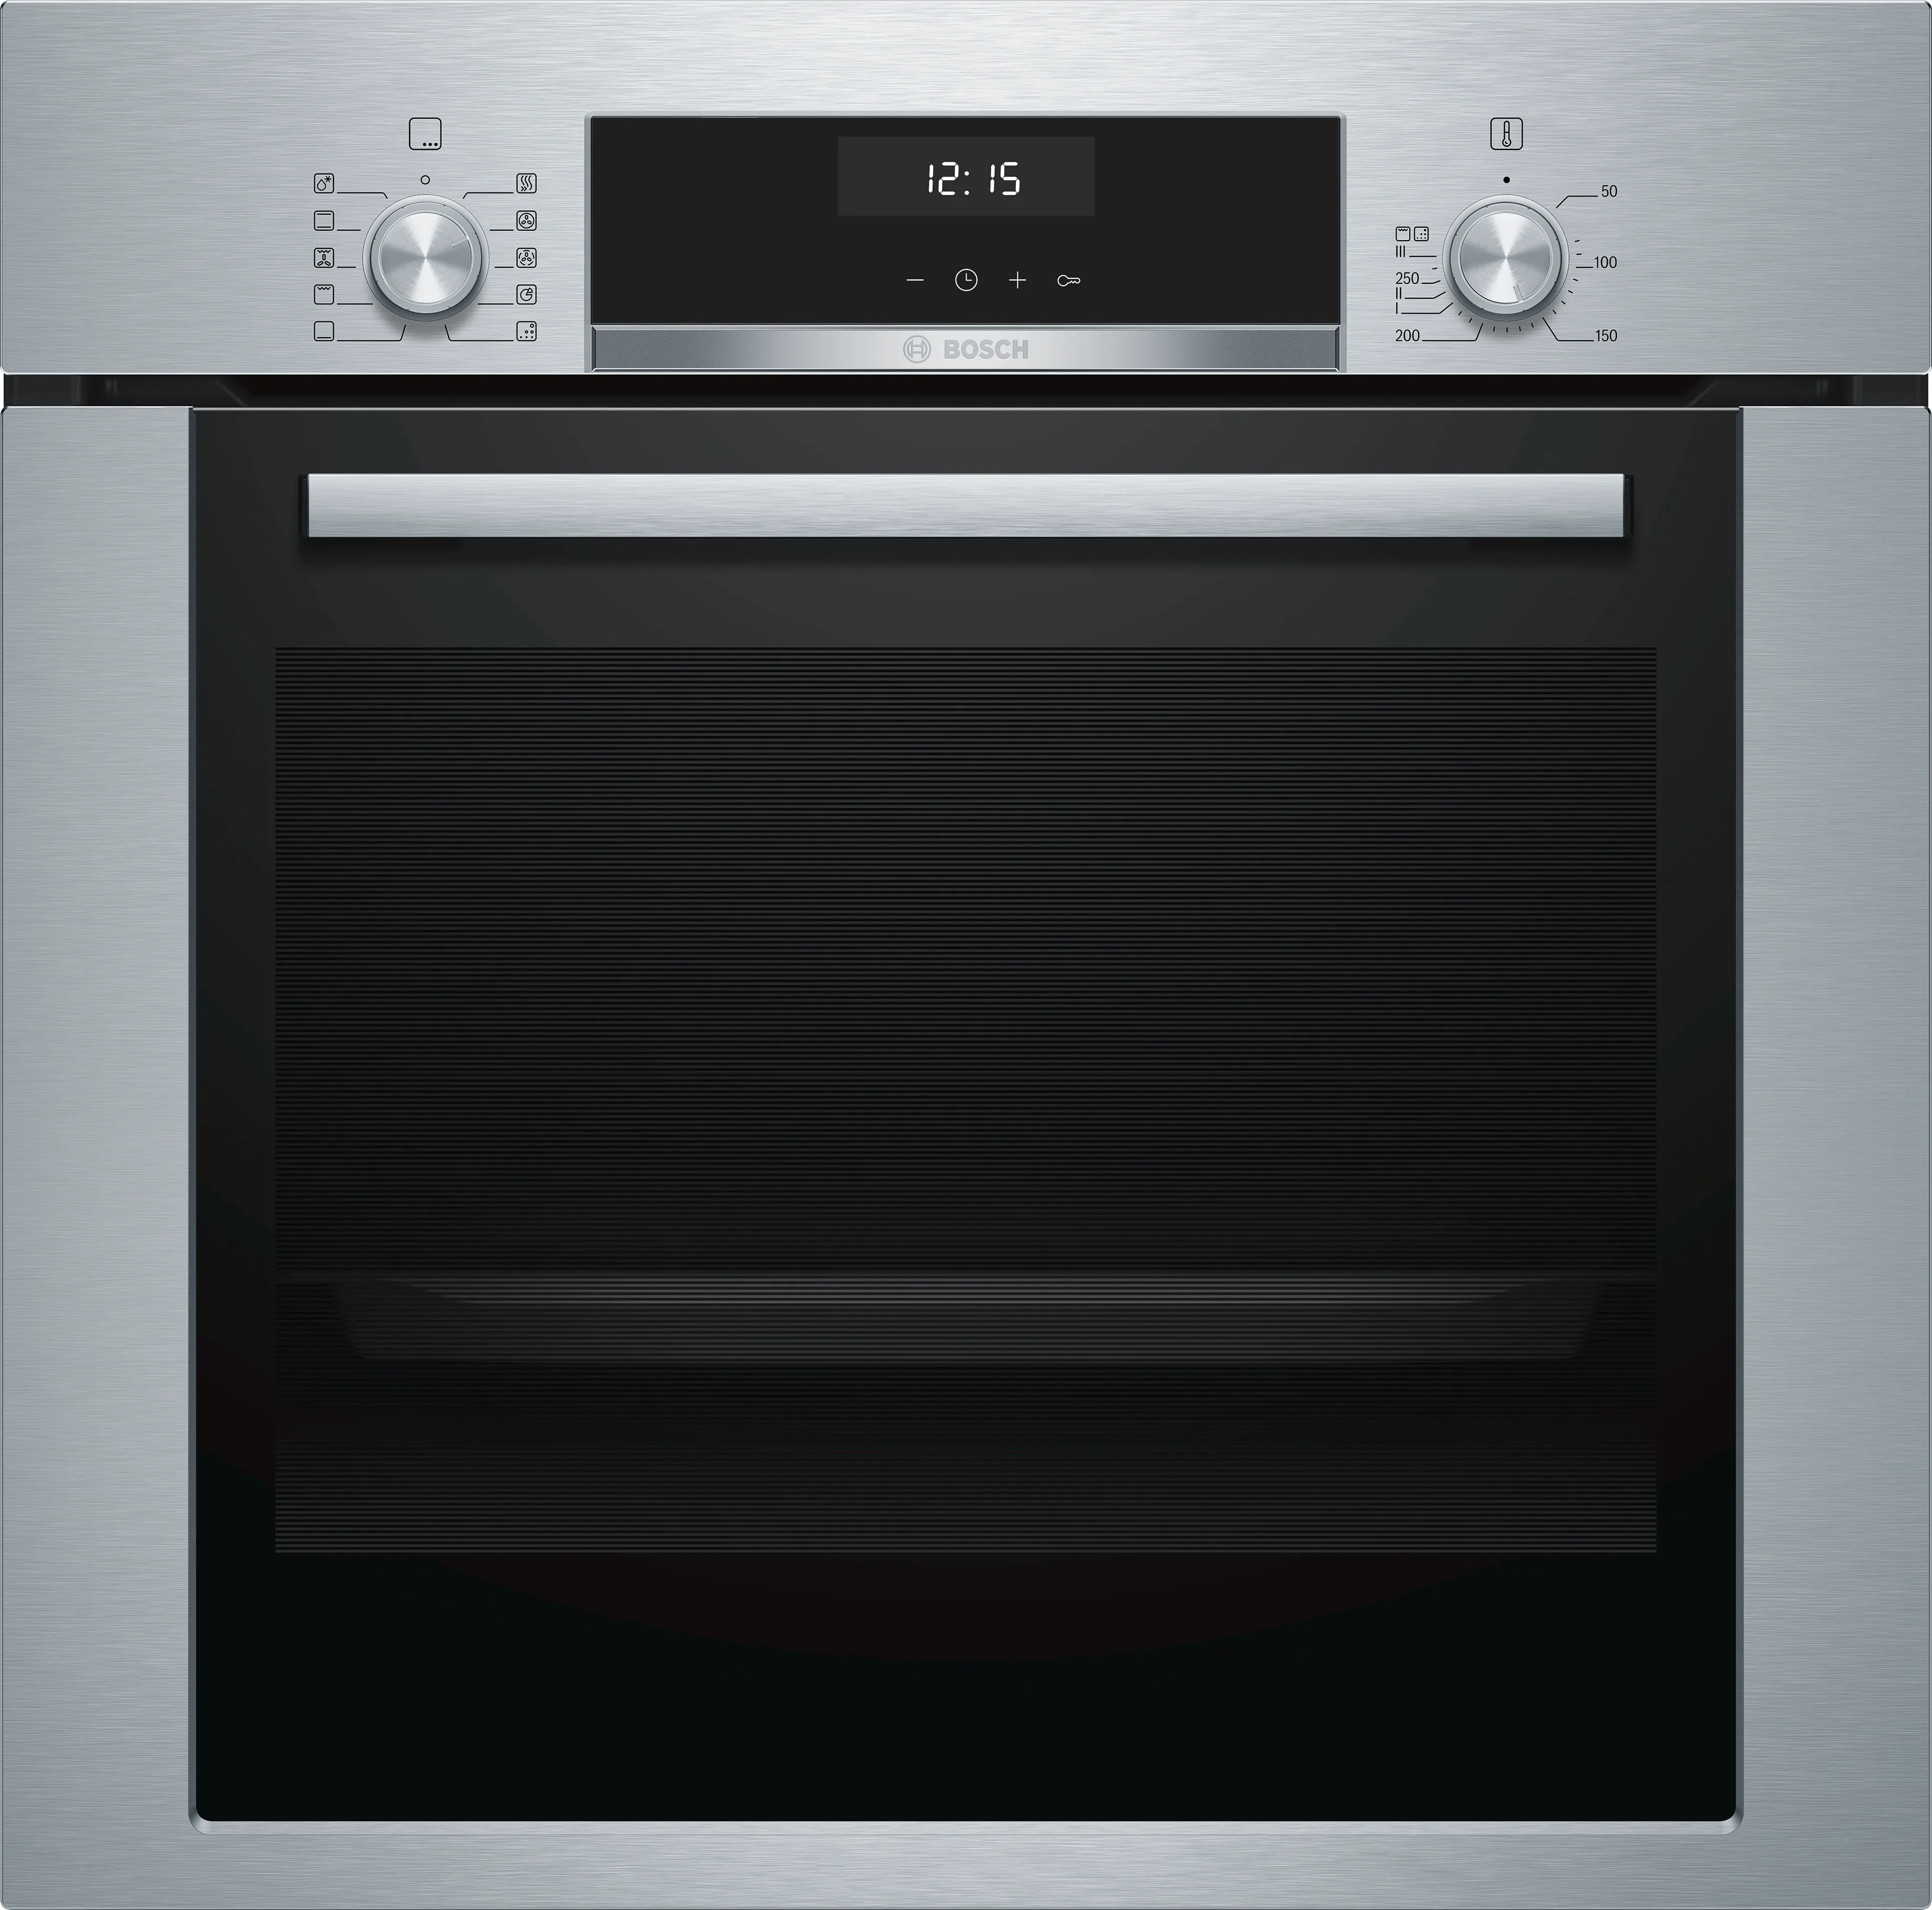 Serie | 6 built-in oven 60 x 60 cm Stainless steel 